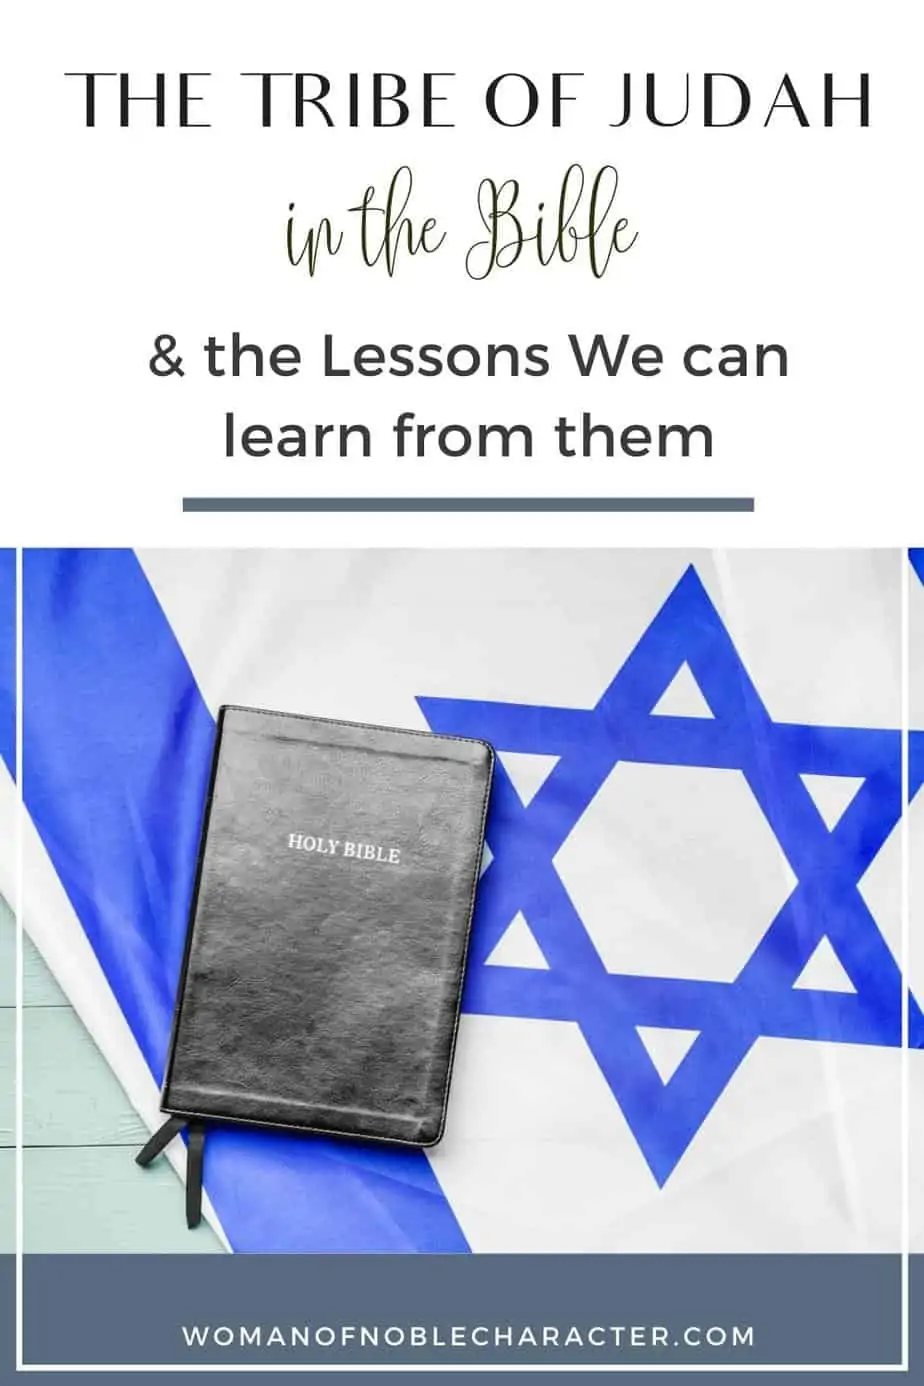 image of the Israeli flag and a Holy BIble  